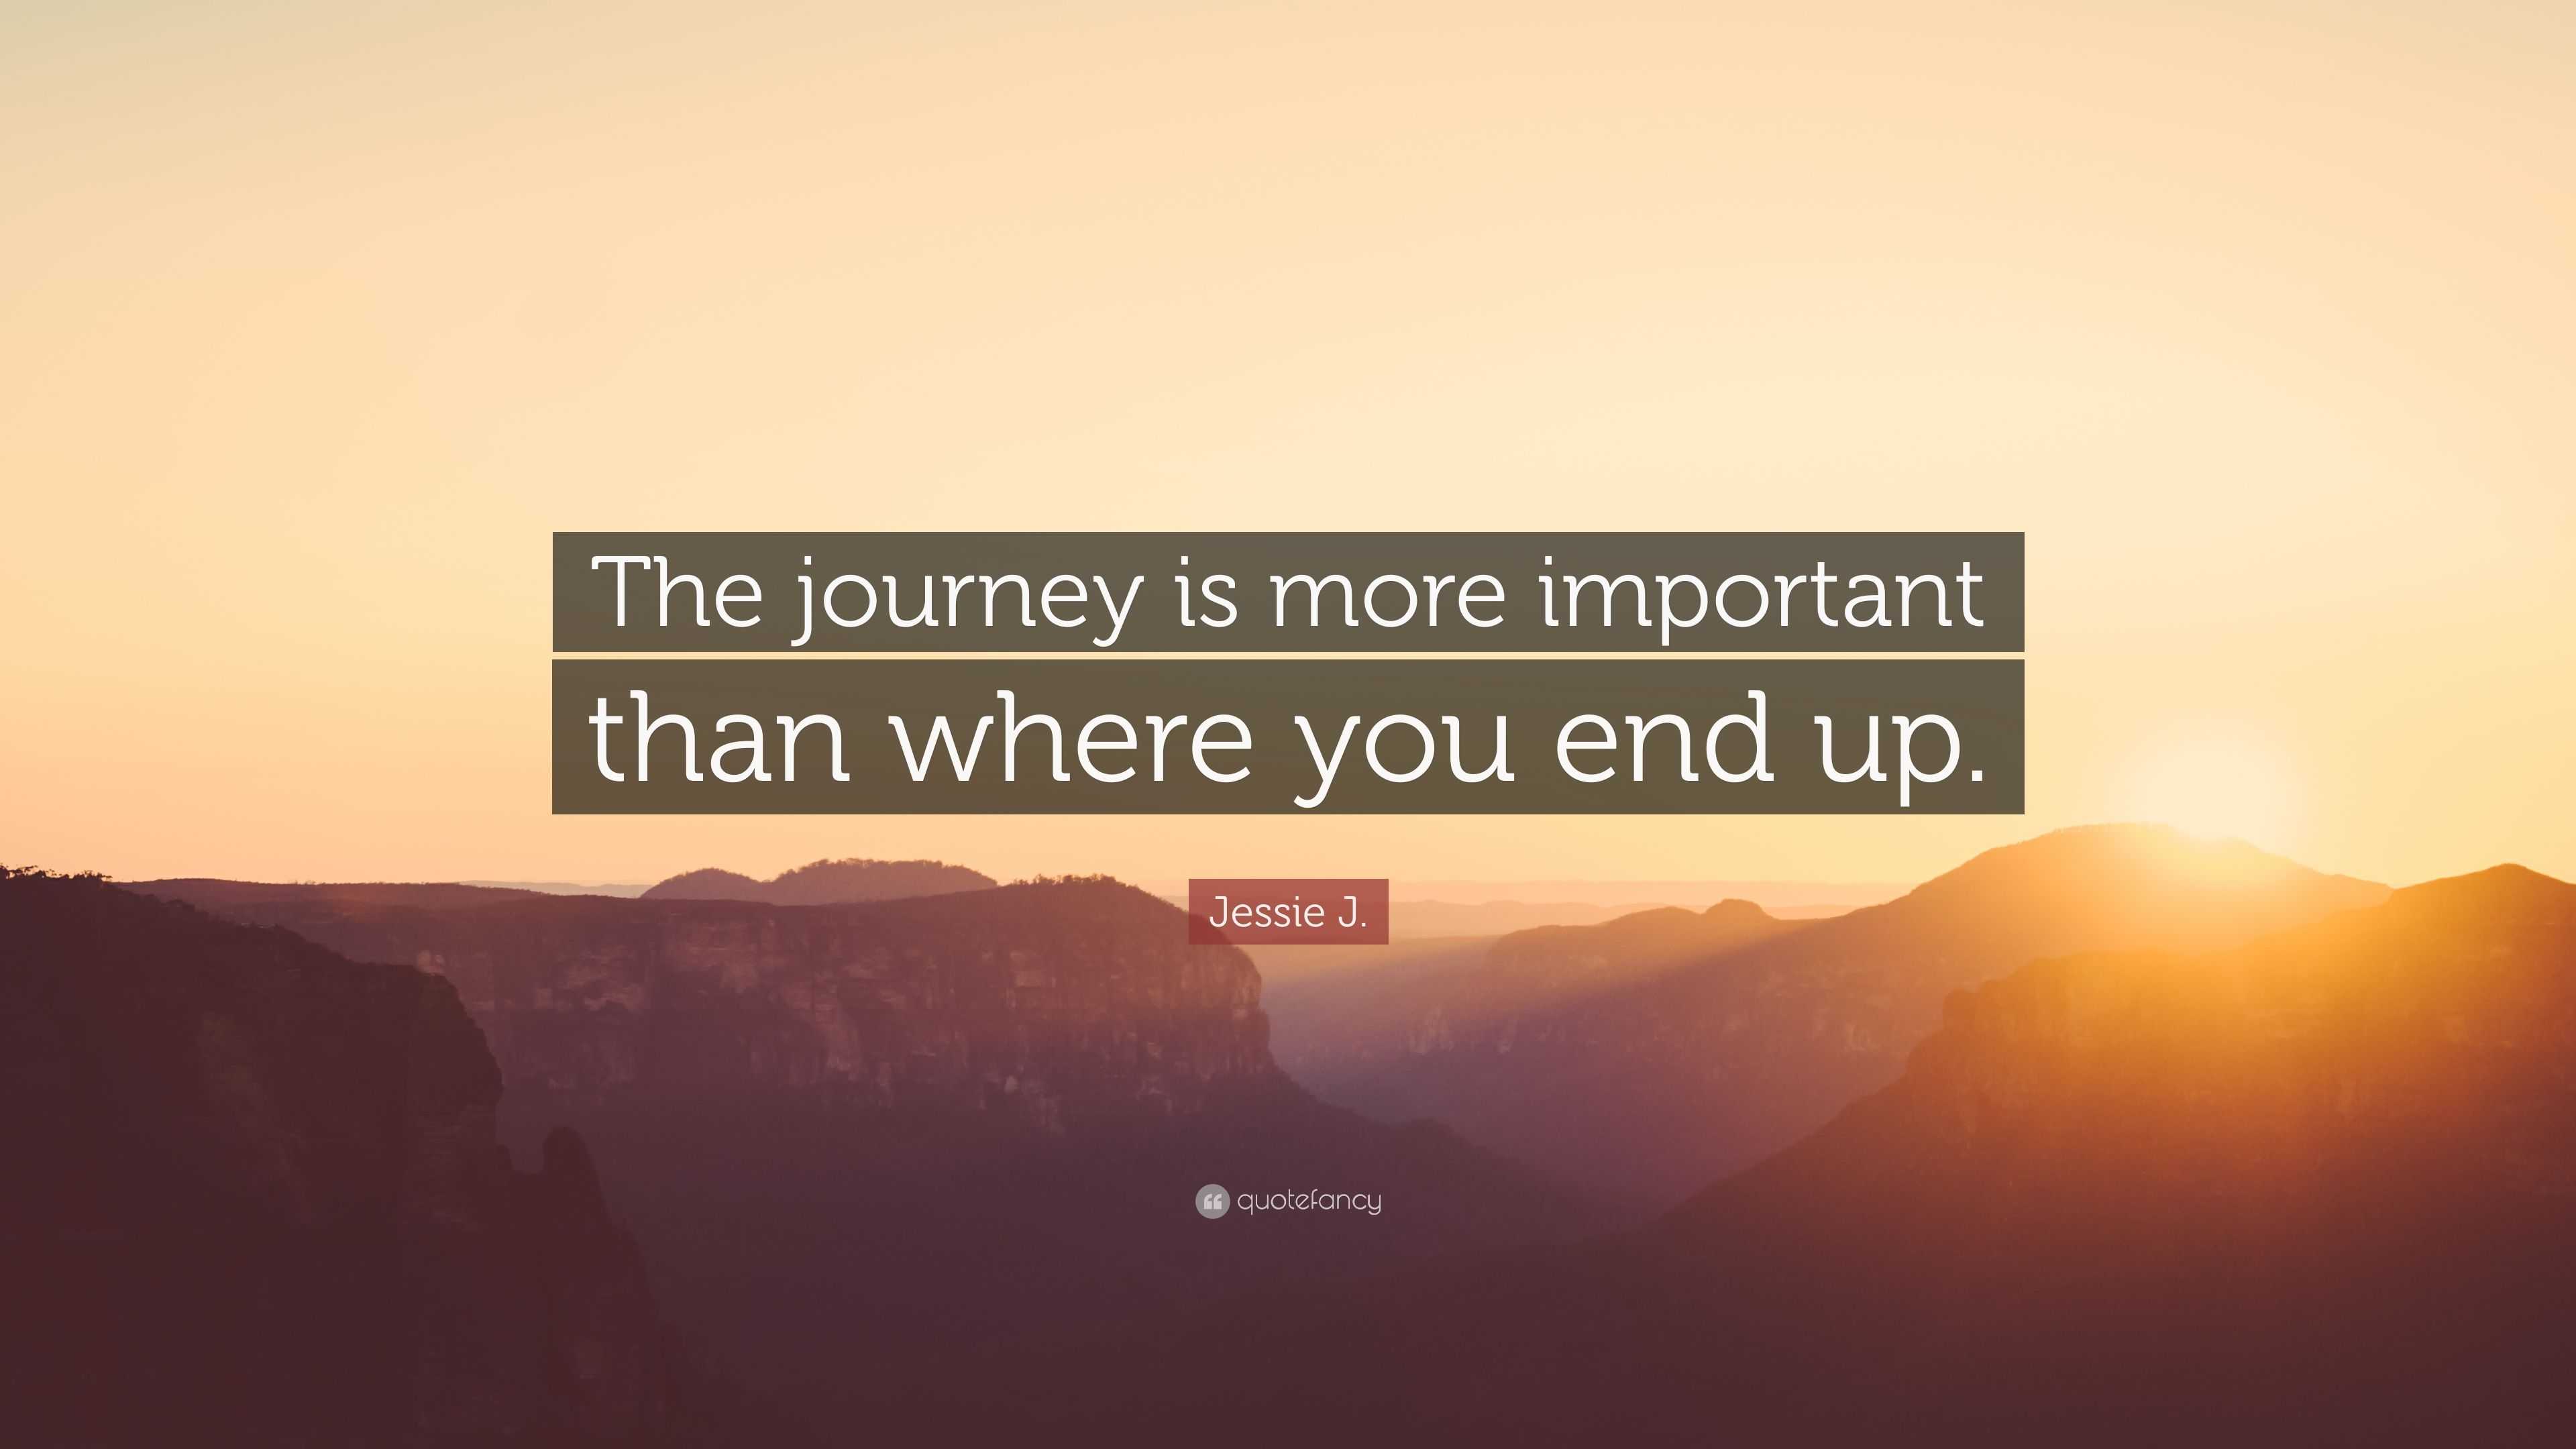 Jessie J. Quote: “The journey is more important than where you end up.”